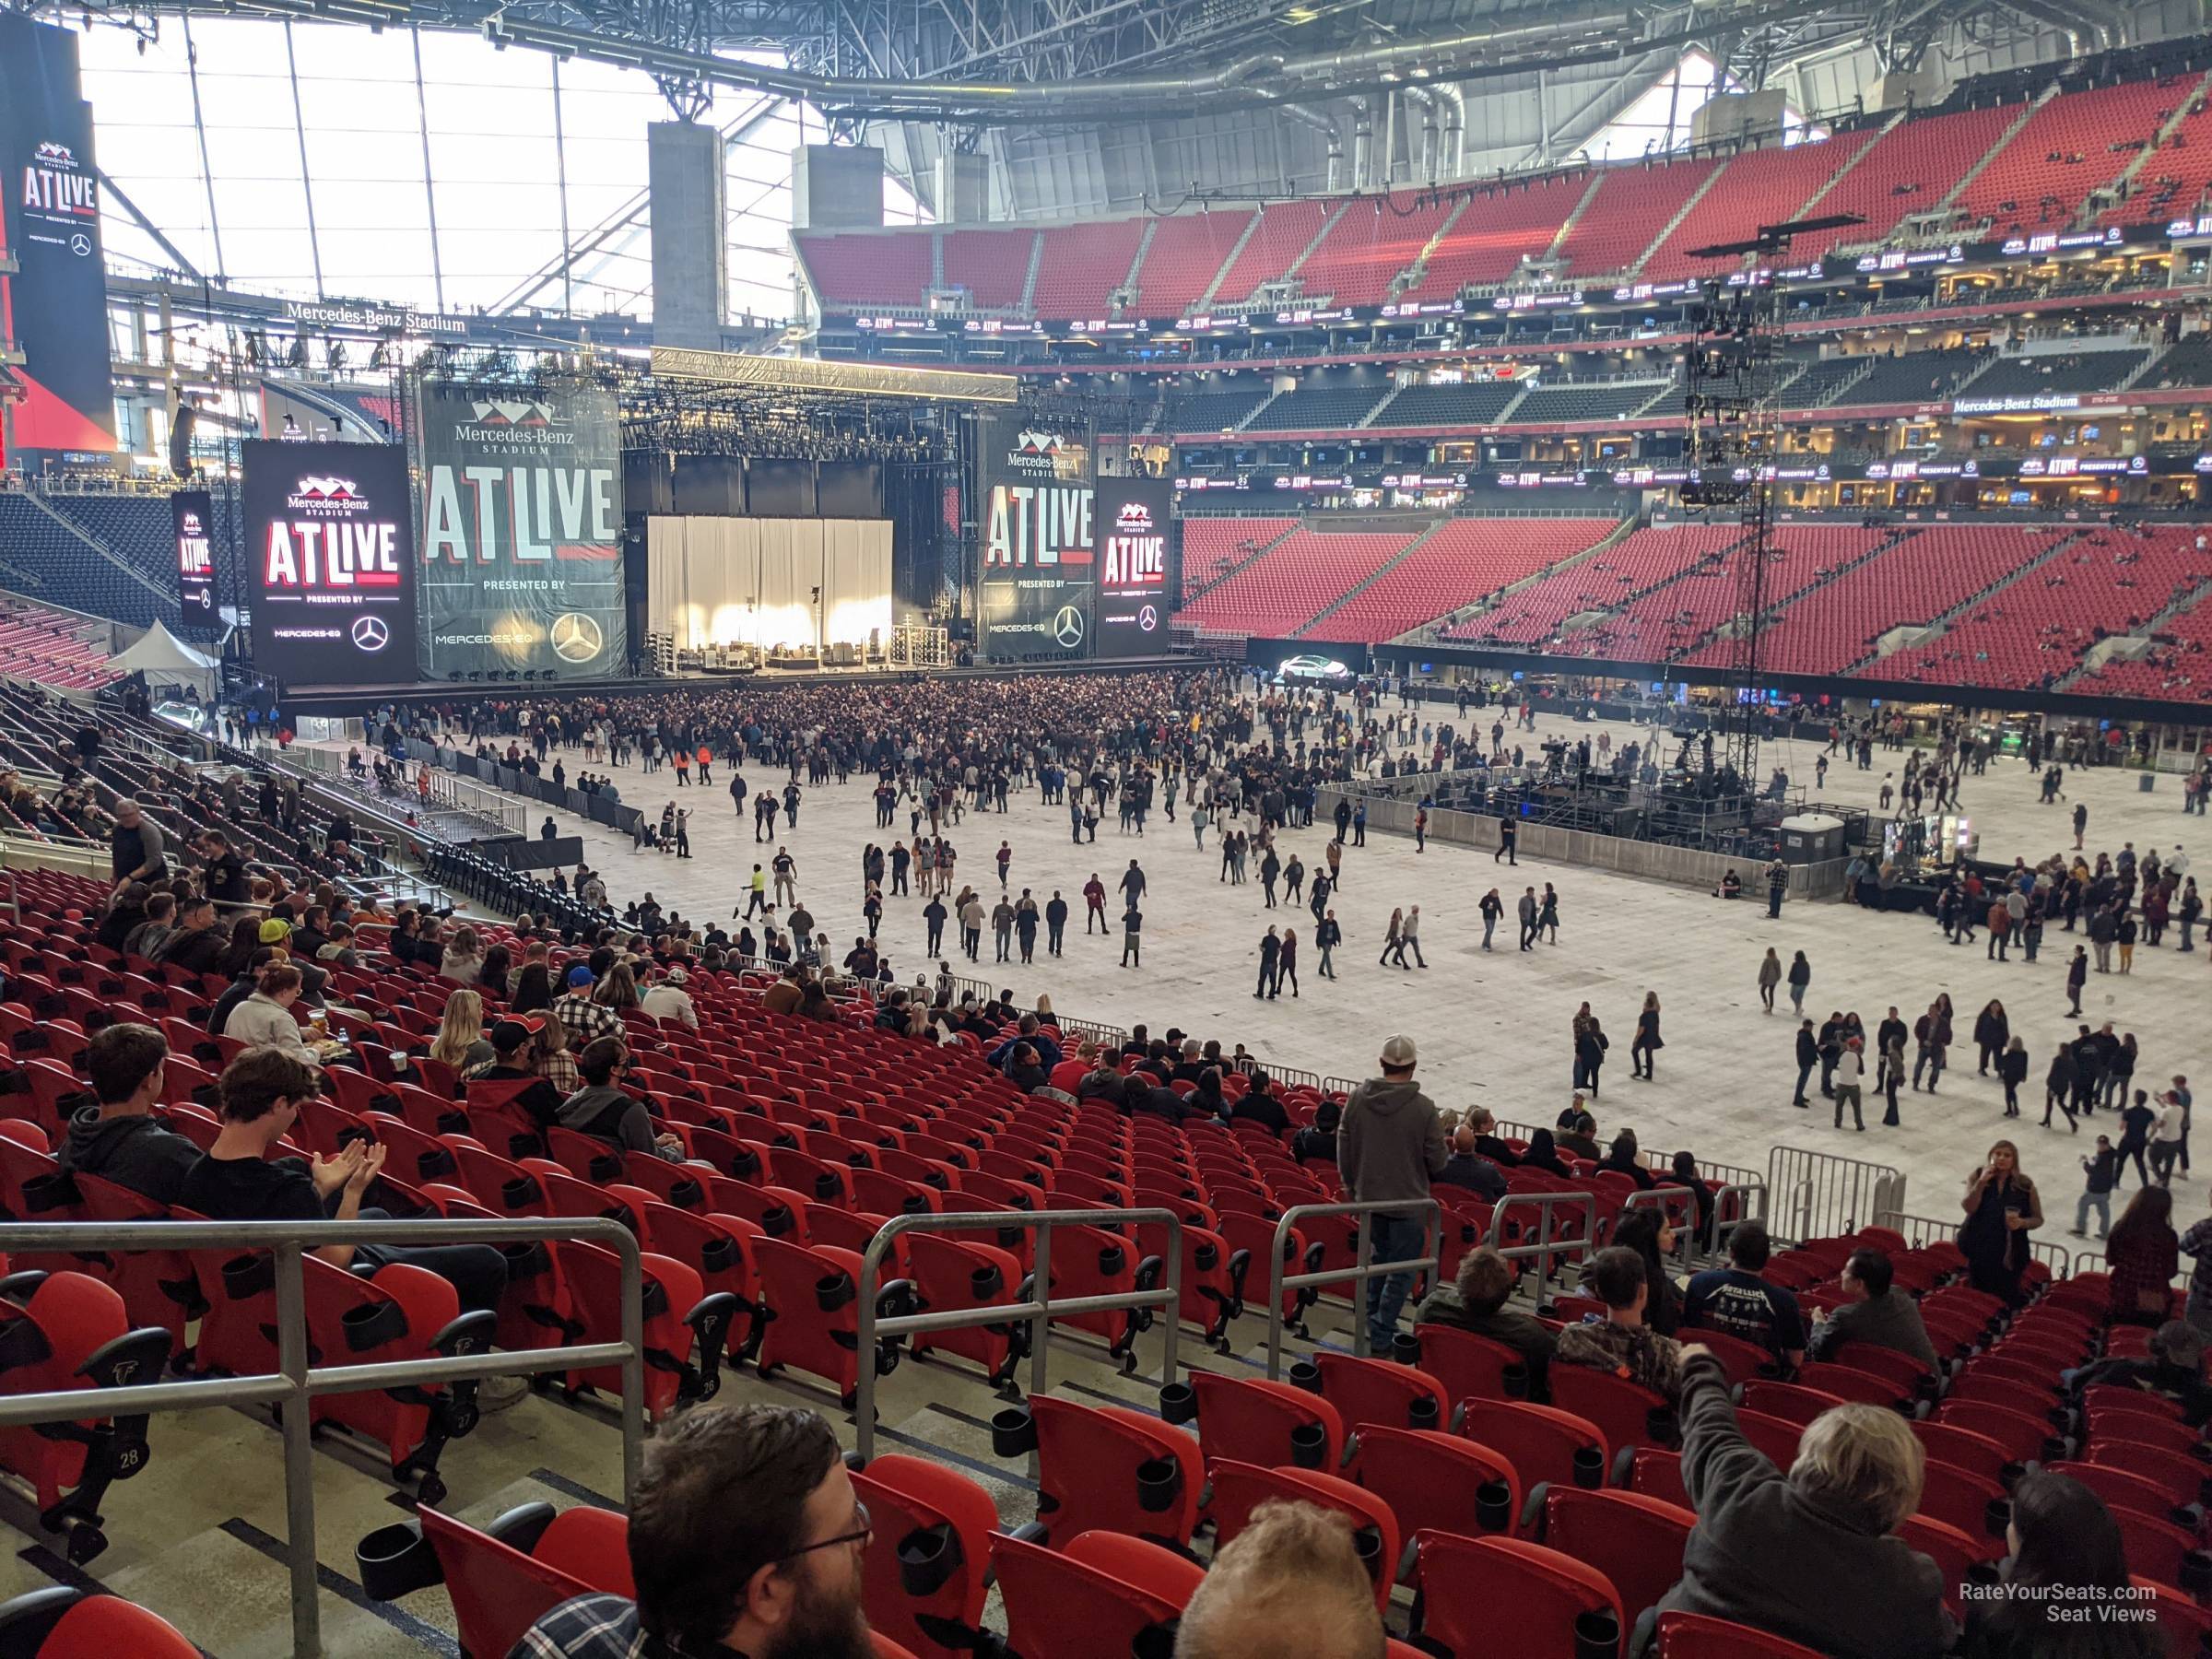 section 123, row 26 seat view  for concert - mercedes-benz stadium